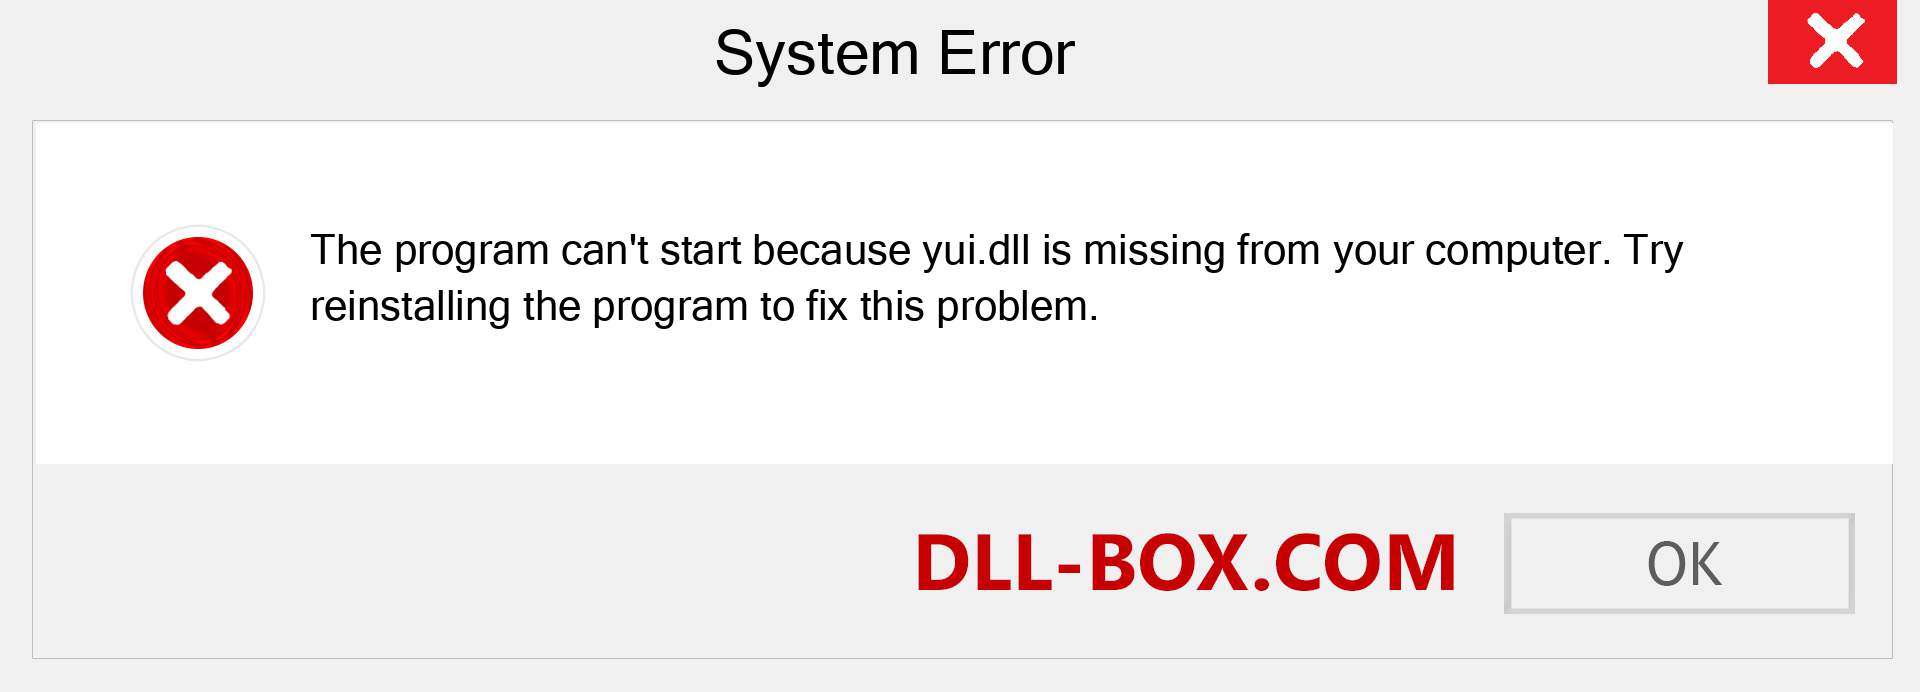  yui.dll file is missing?. Download for Windows 7, 8, 10 - Fix  yui dll Missing Error on Windows, photos, images